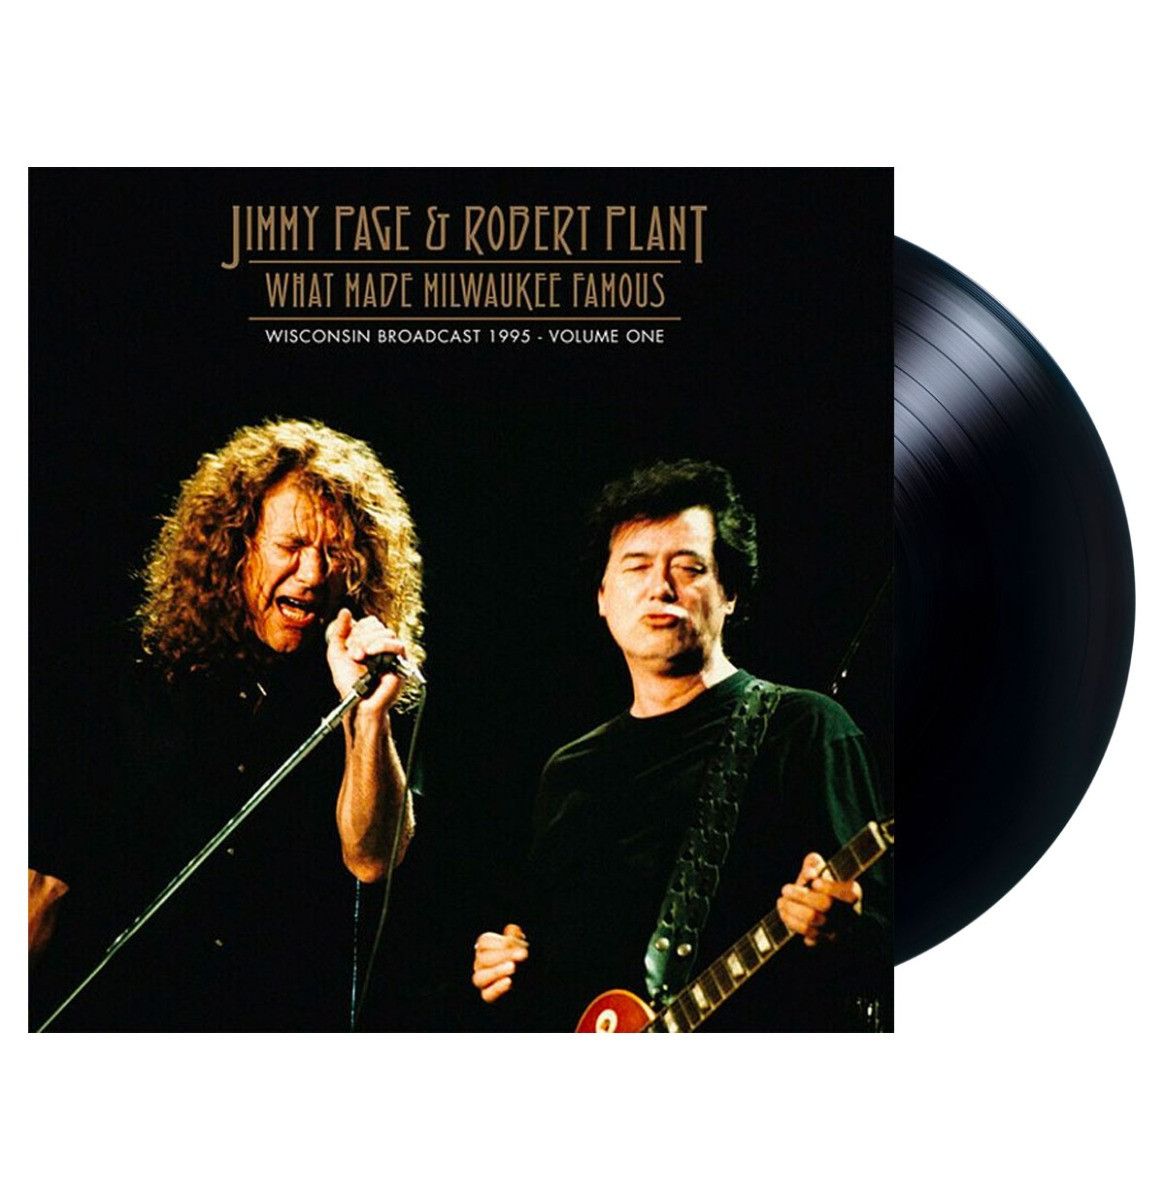 Jimmy Page & Robert Plant - What Made Milwaukee Famous Volume One 2LP